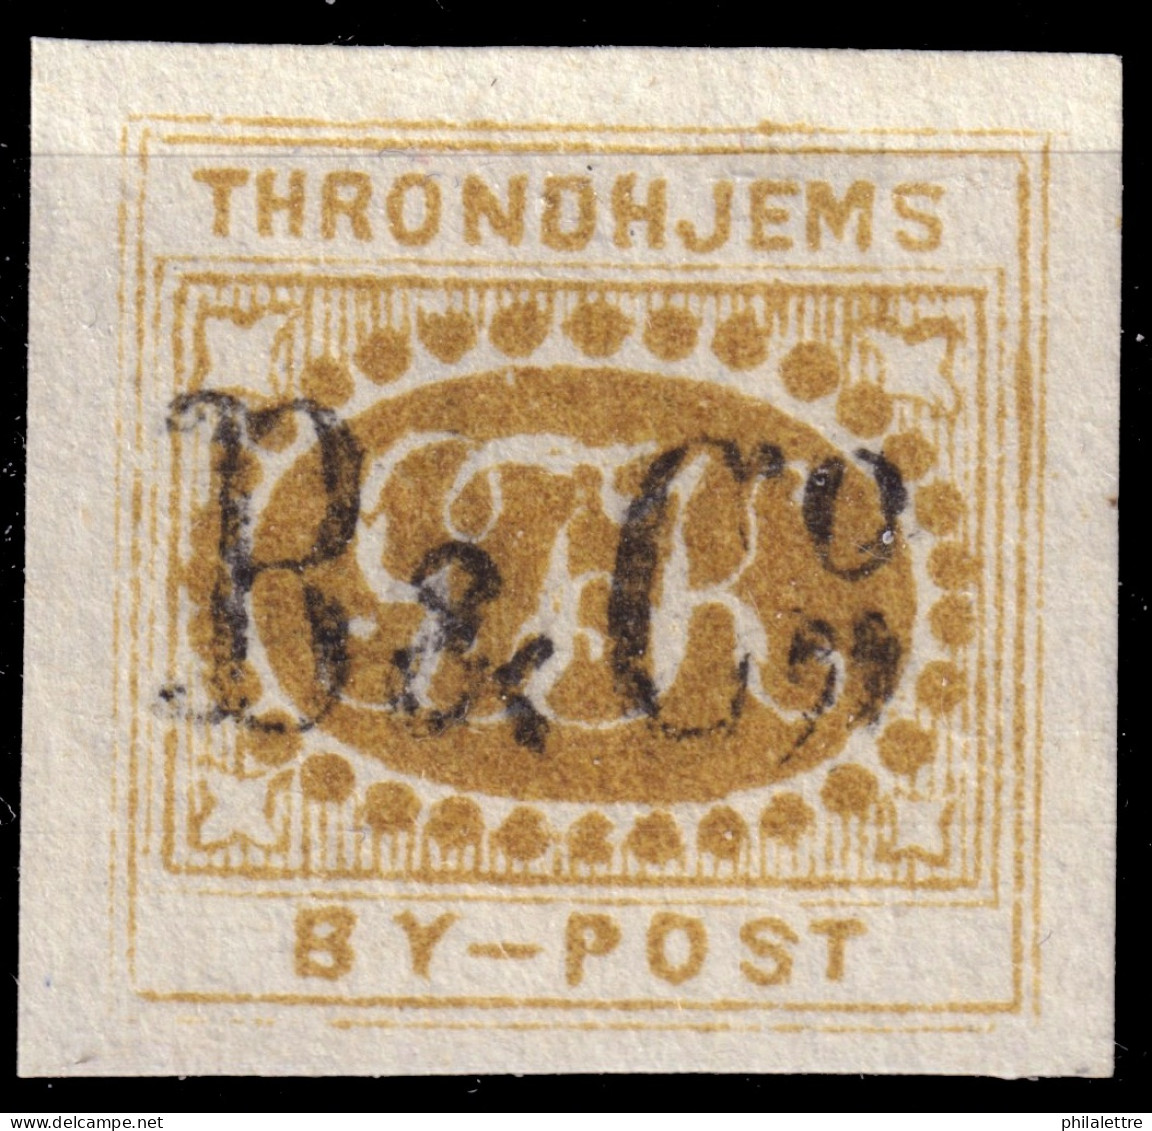 NORVÈGE / NORWAY - Braekstad Local Post TRONDHJEM (Trondheim) 1sk Ochre With B&C° O/P (type 4 Reprint, 1872) - No Gum - Emisiones Locales